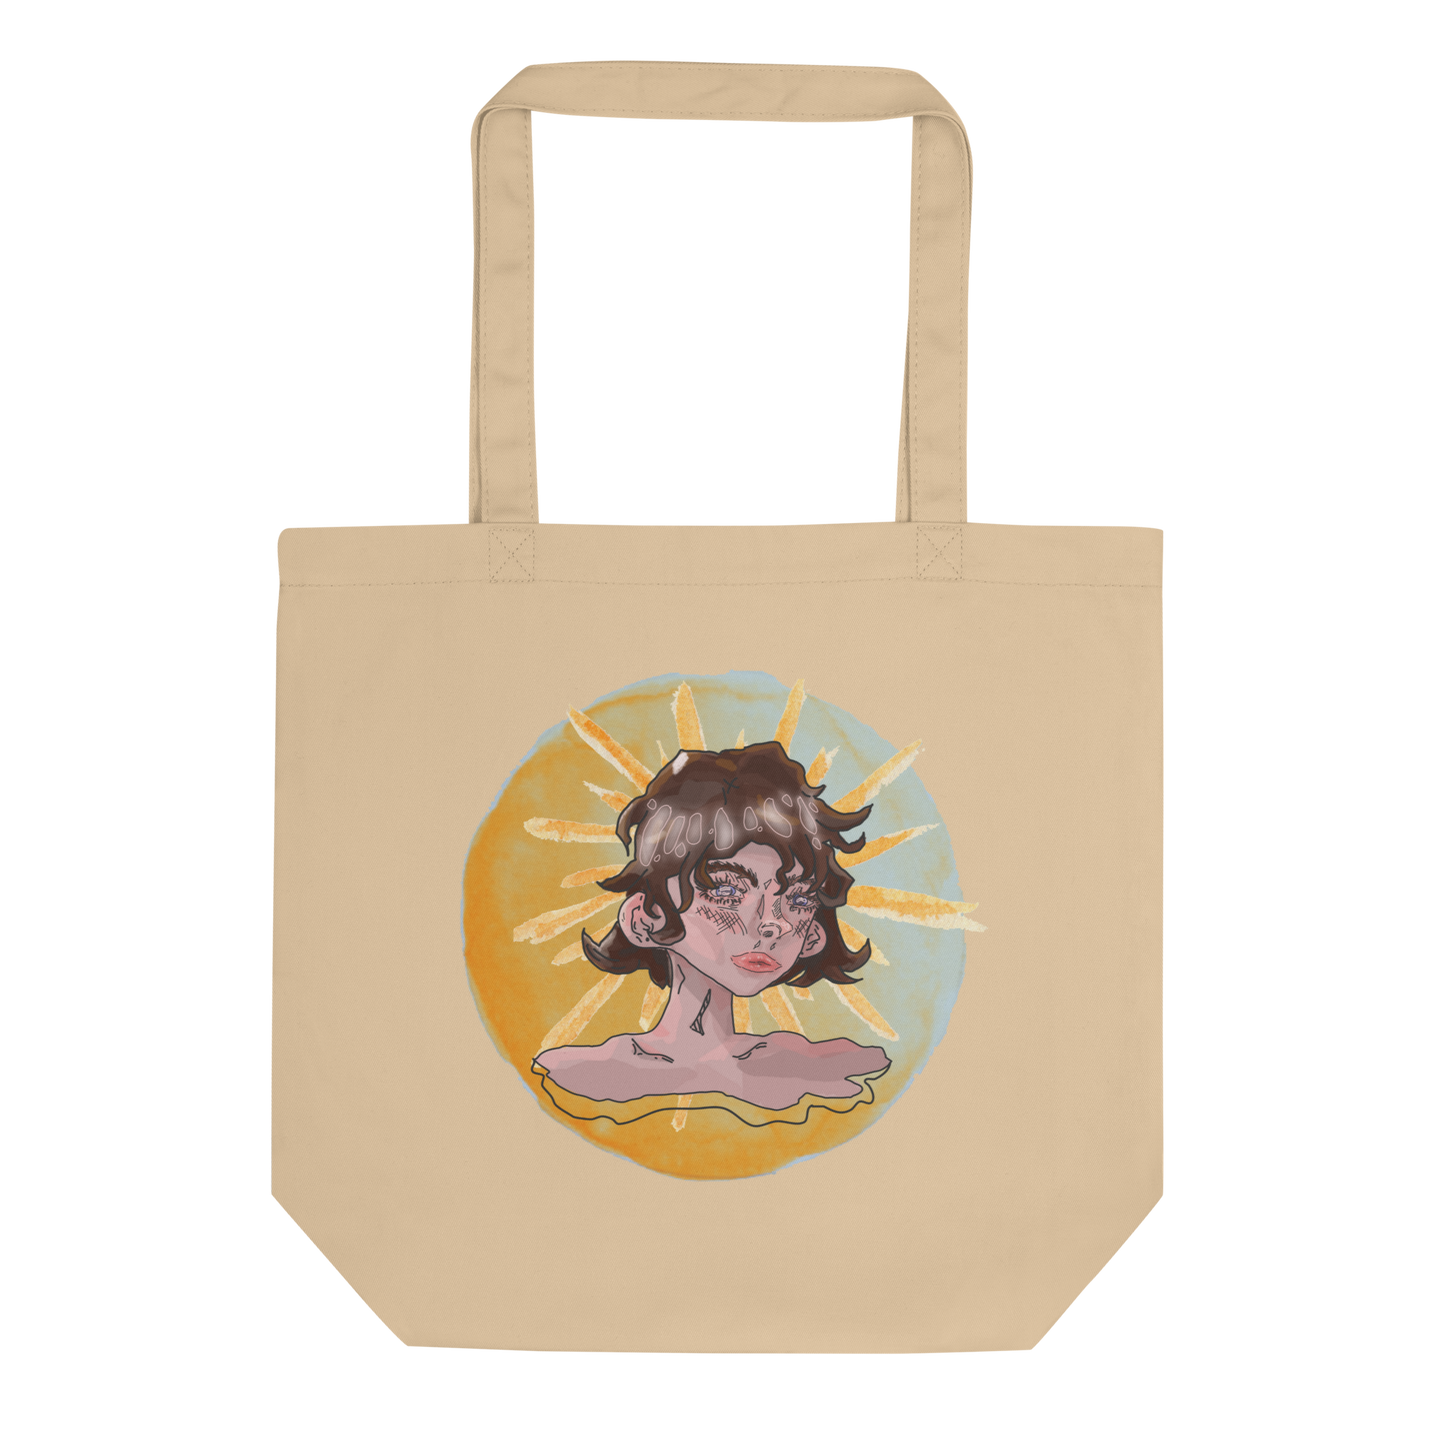 The 'Sunshine Girl' Tote in oyster color, presented in a lay-flat image, captures the charm of the girl's thoughtful portrait, a stylish and sustainable option for the imaginative and environmentally aware.